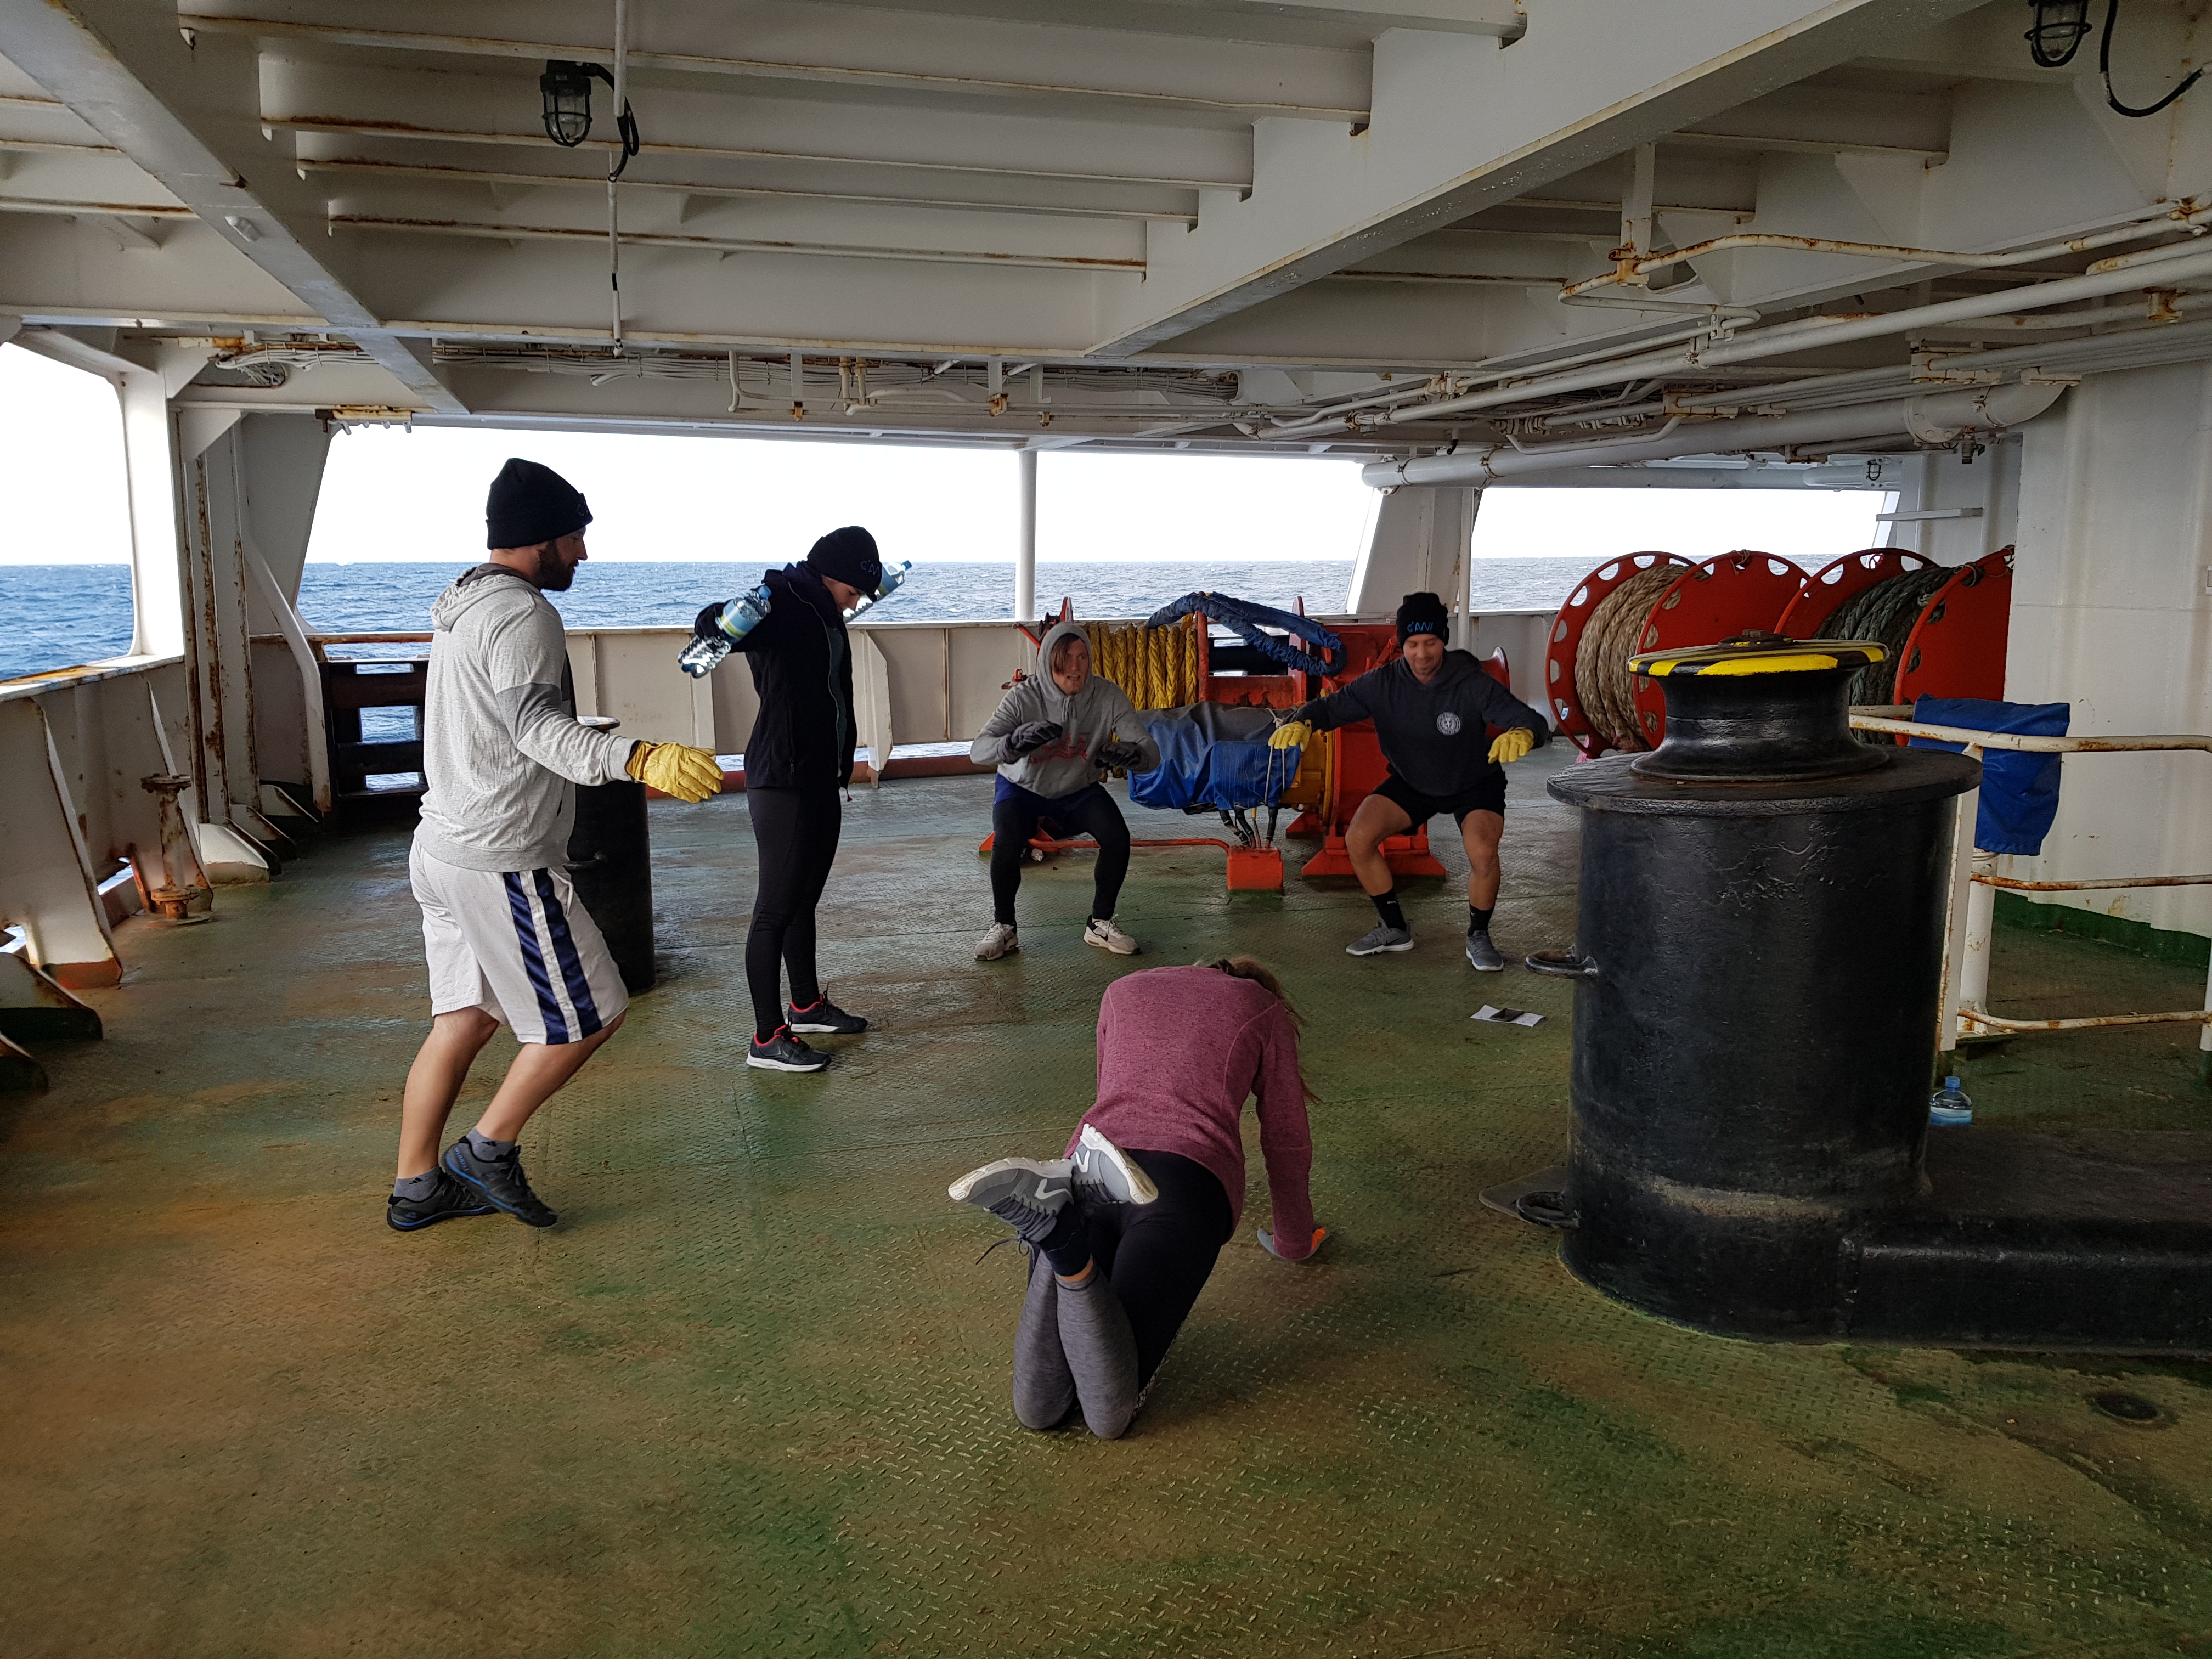 Crossfit on the ship deck